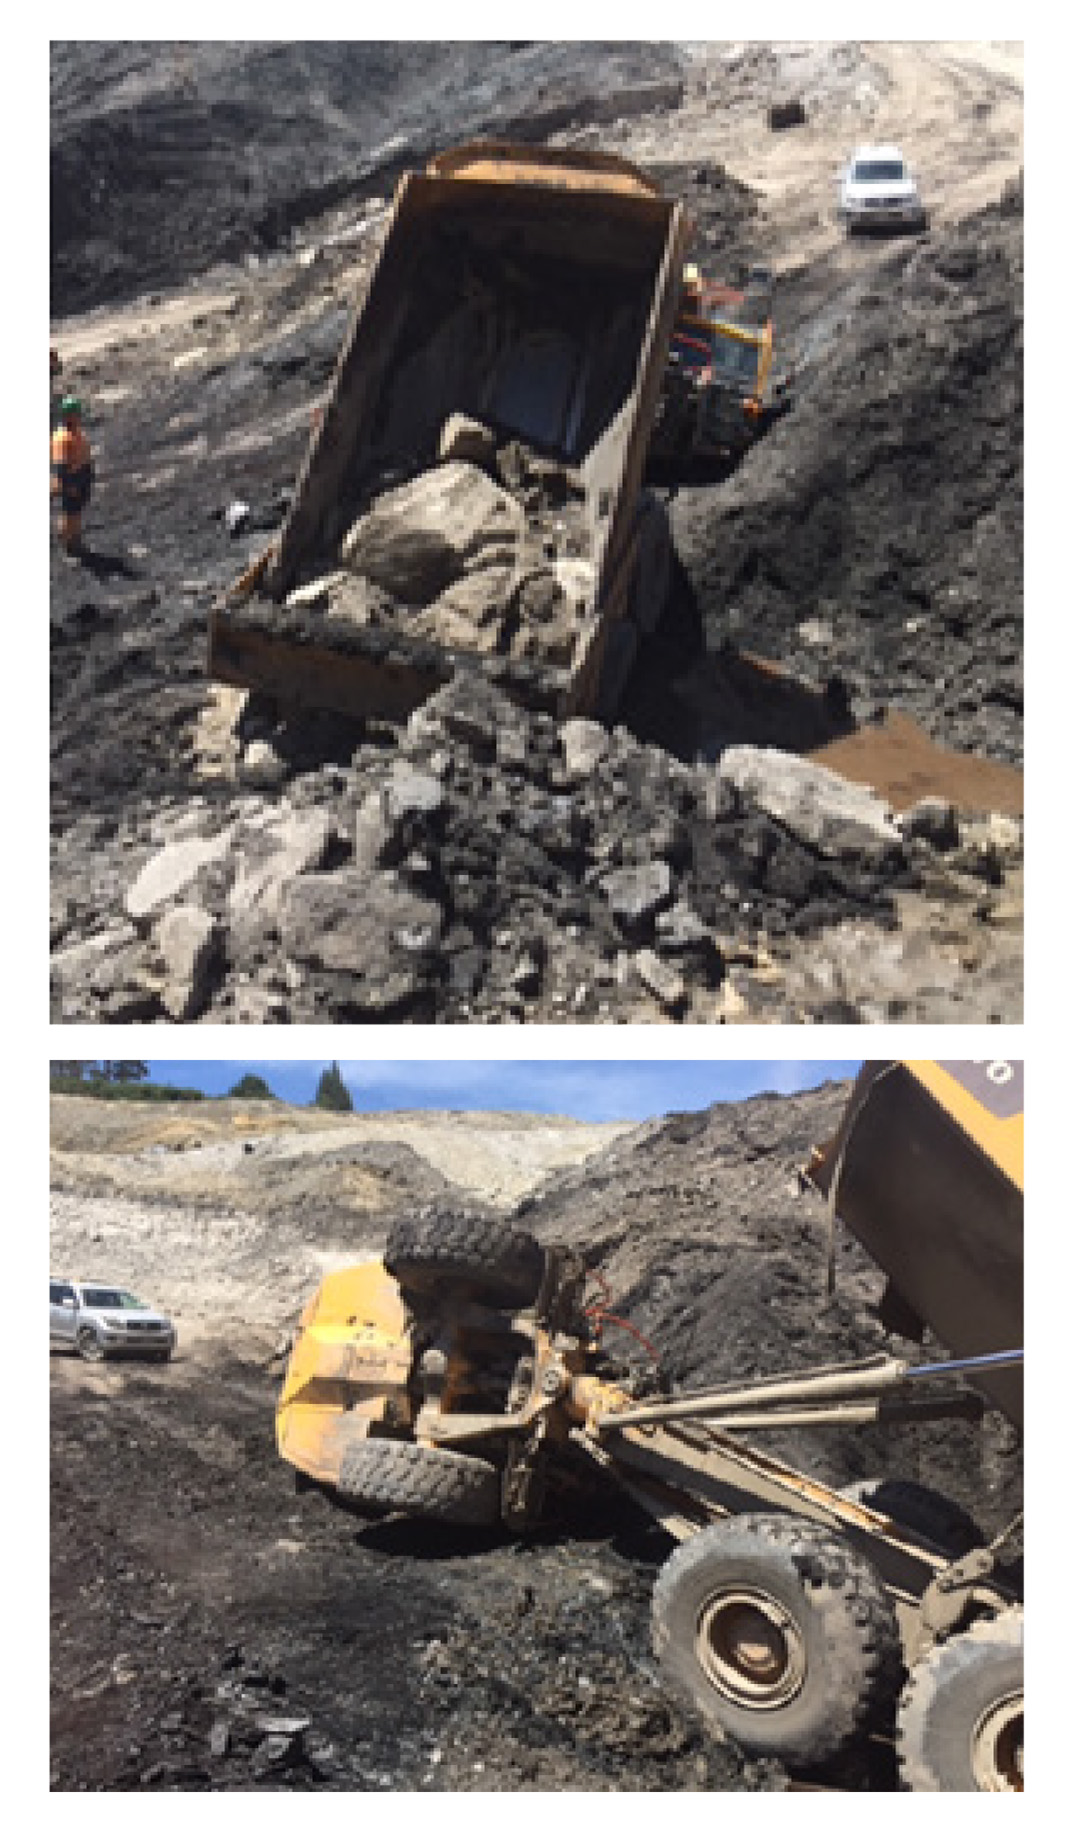 [image] two angles of a loading truck tipped over with rock and debris overflowing